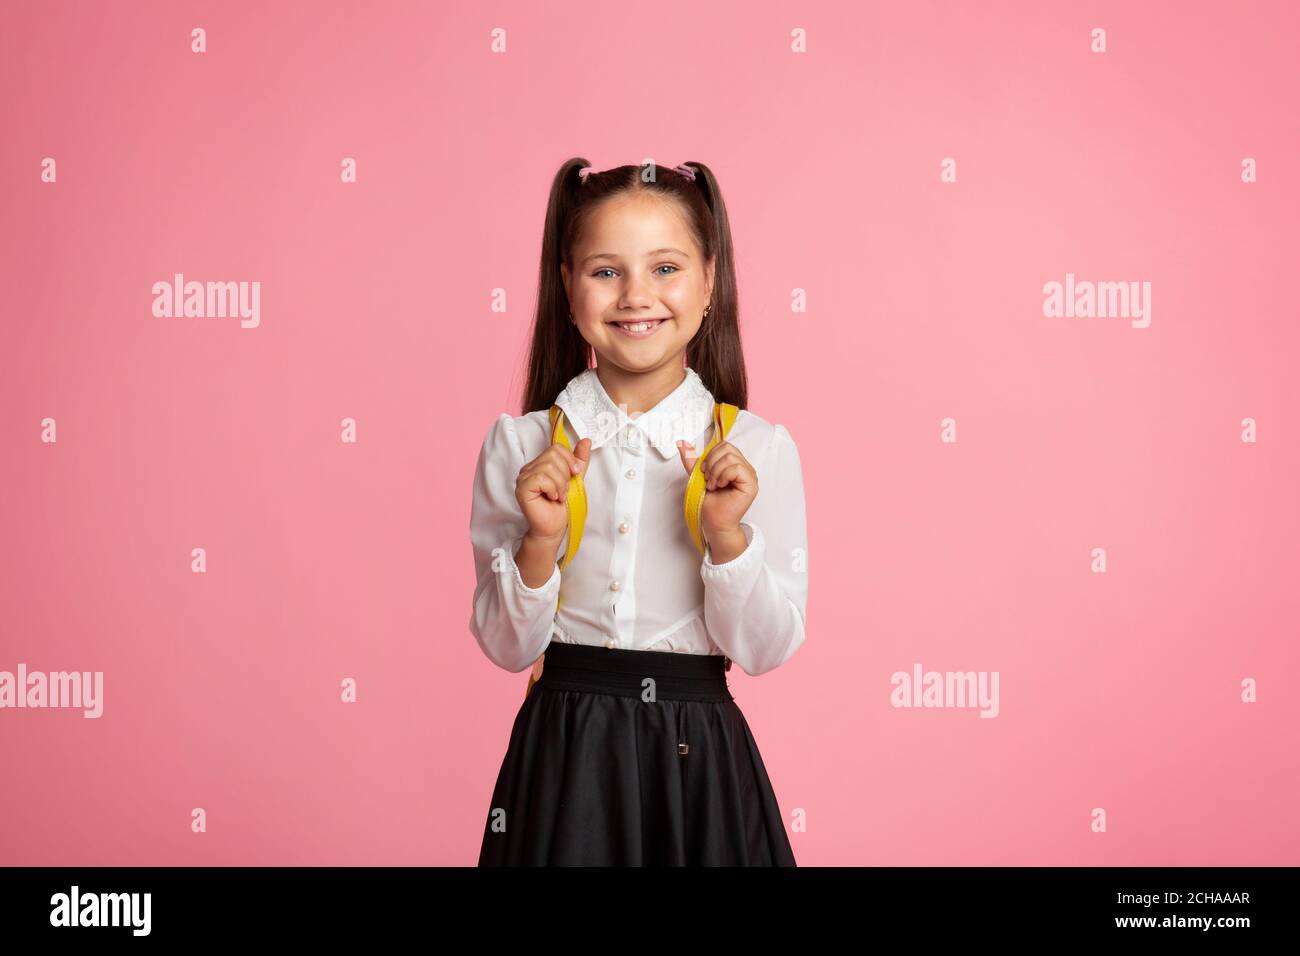 Inspiring education. Little child in school uniform with backpack smiles at camera Stock Photo